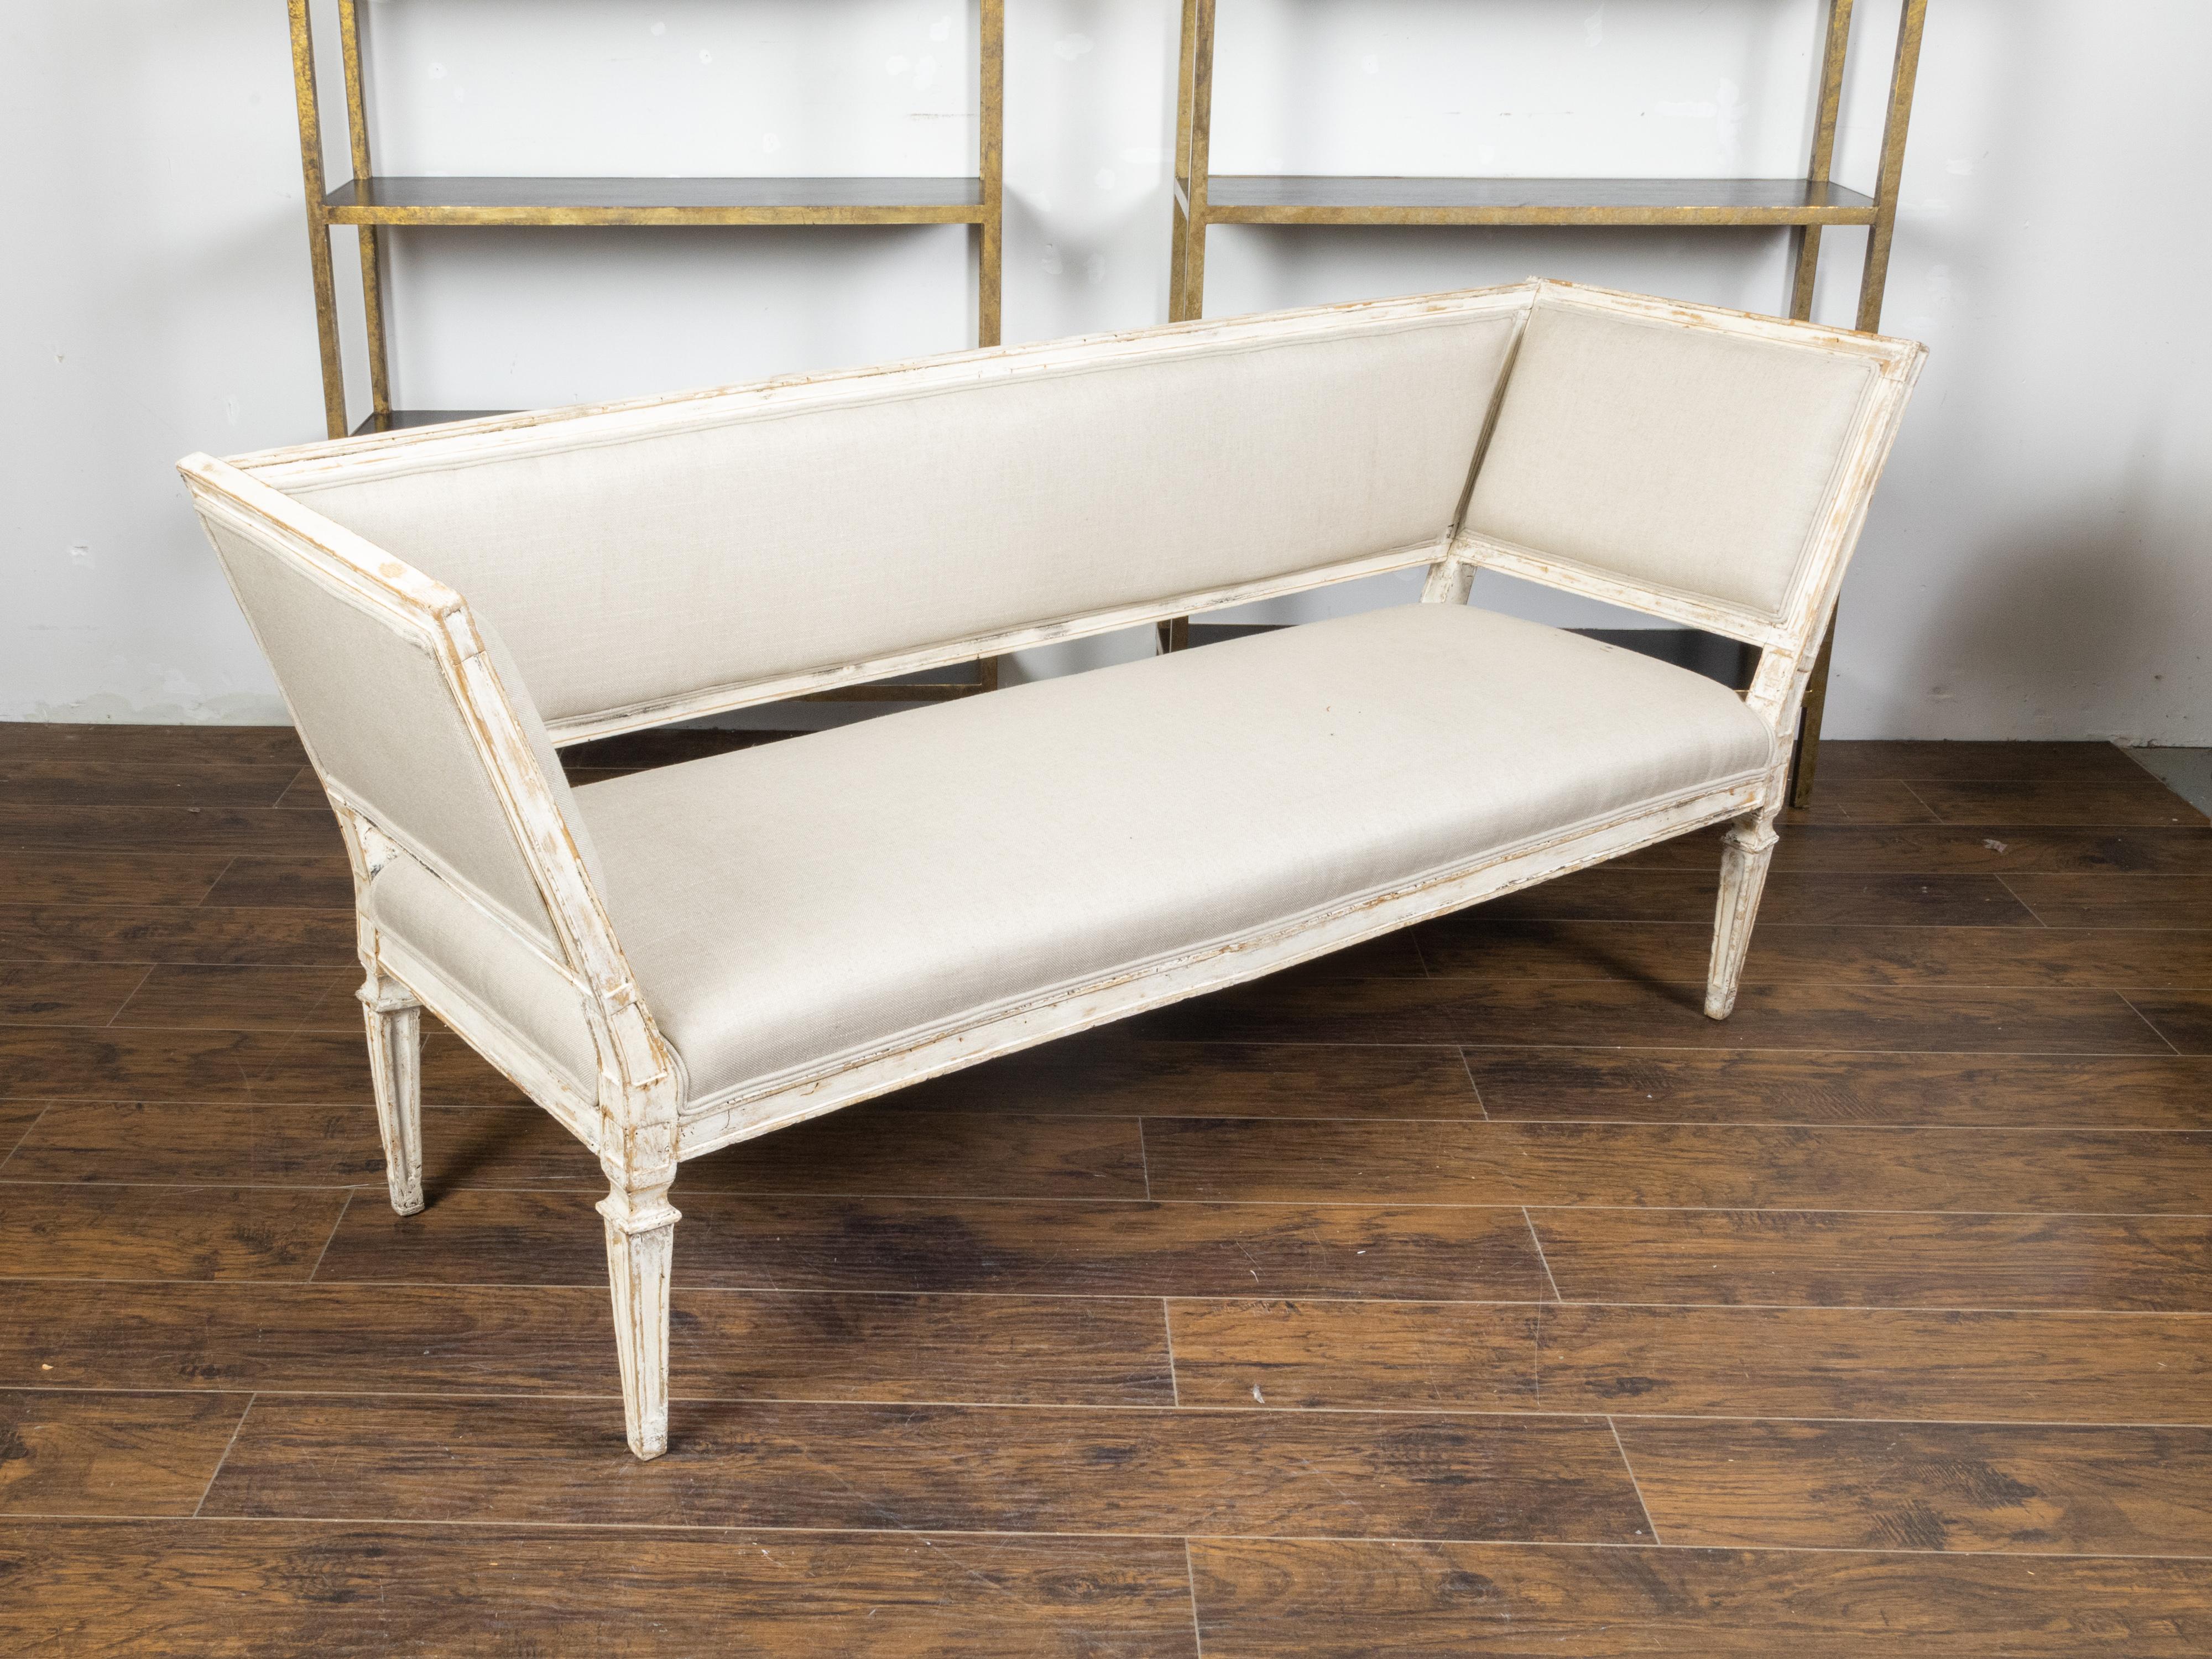 Italian 19th Century White Painted Sofa with Slanted Sides and Distressed Patina In Good Condition For Sale In Atlanta, GA